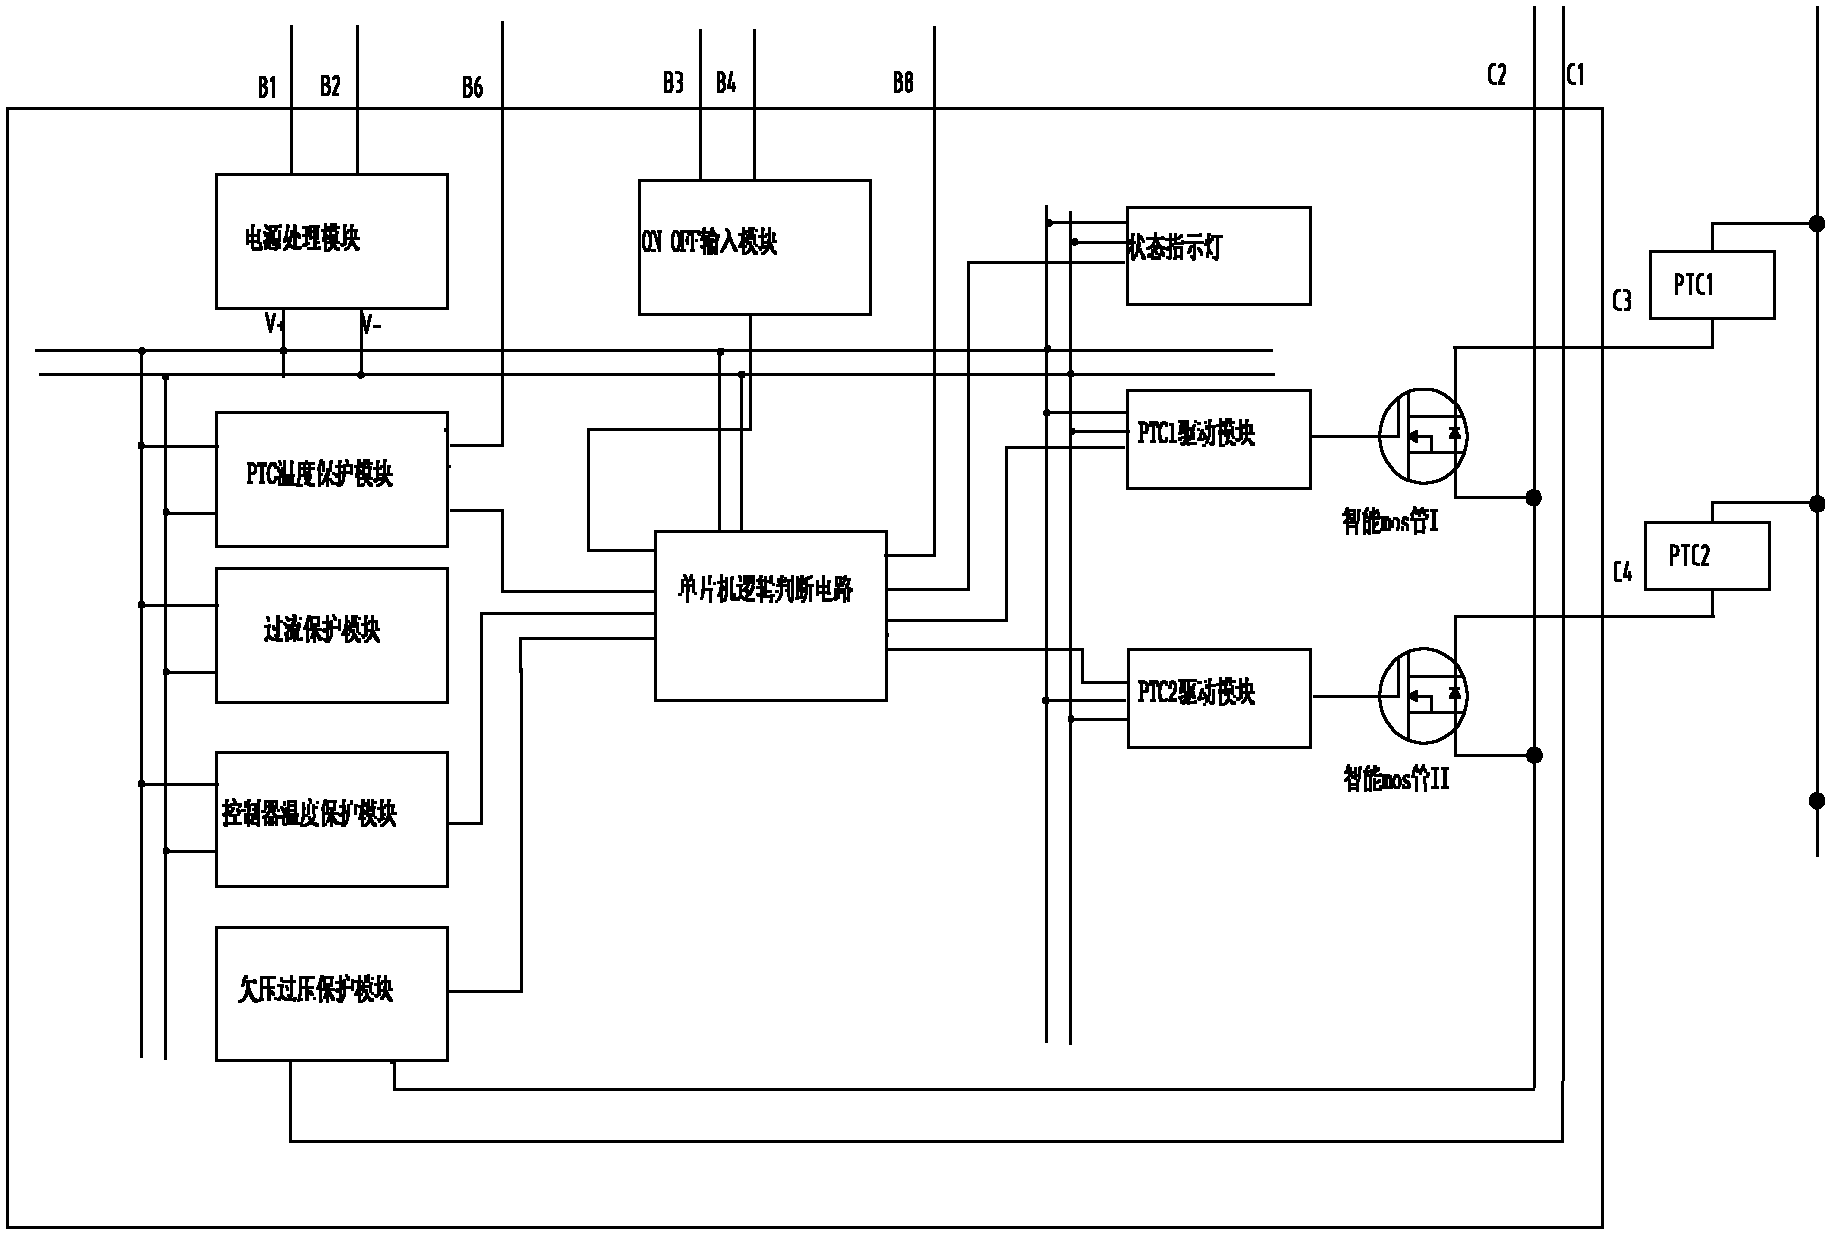 Air conditioning system of electric vehicle